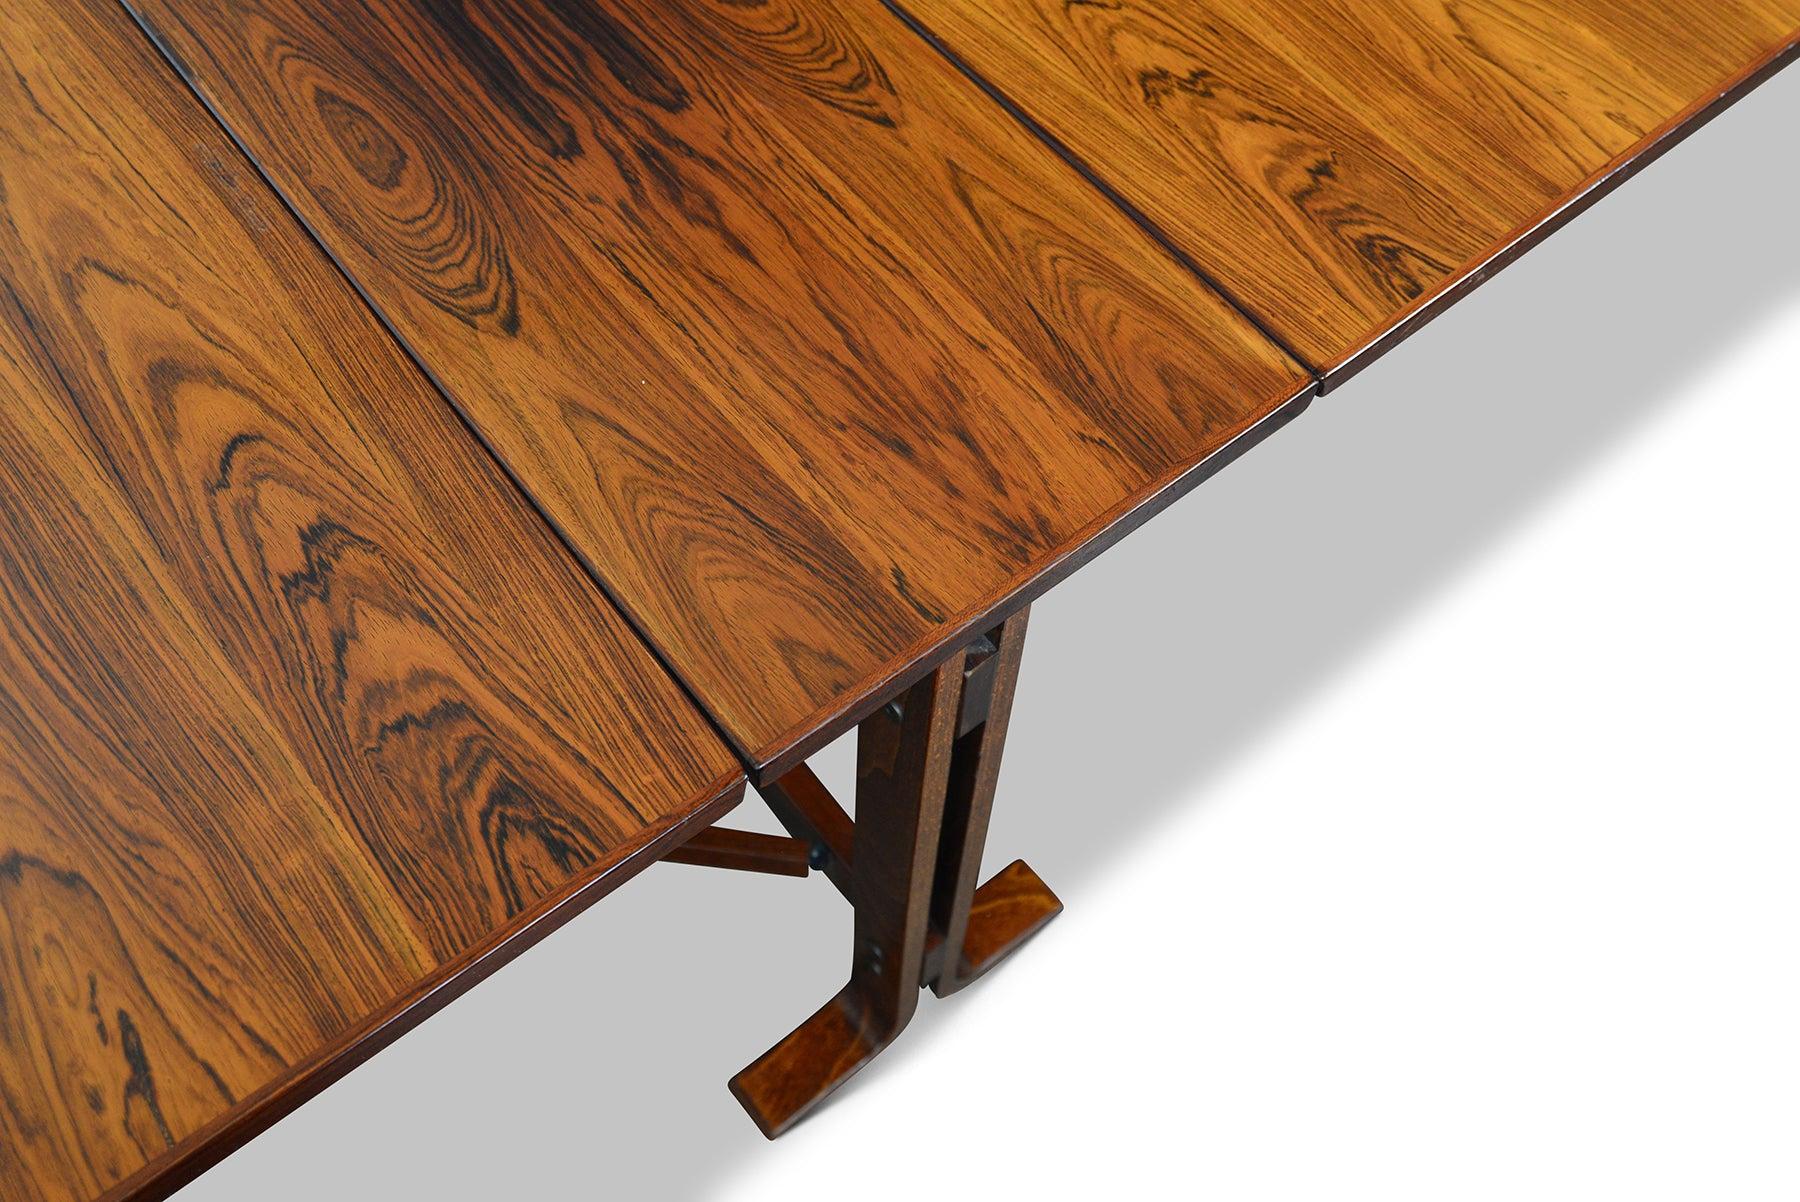 Drop Leaf Dining Table In Rosewood #1 3